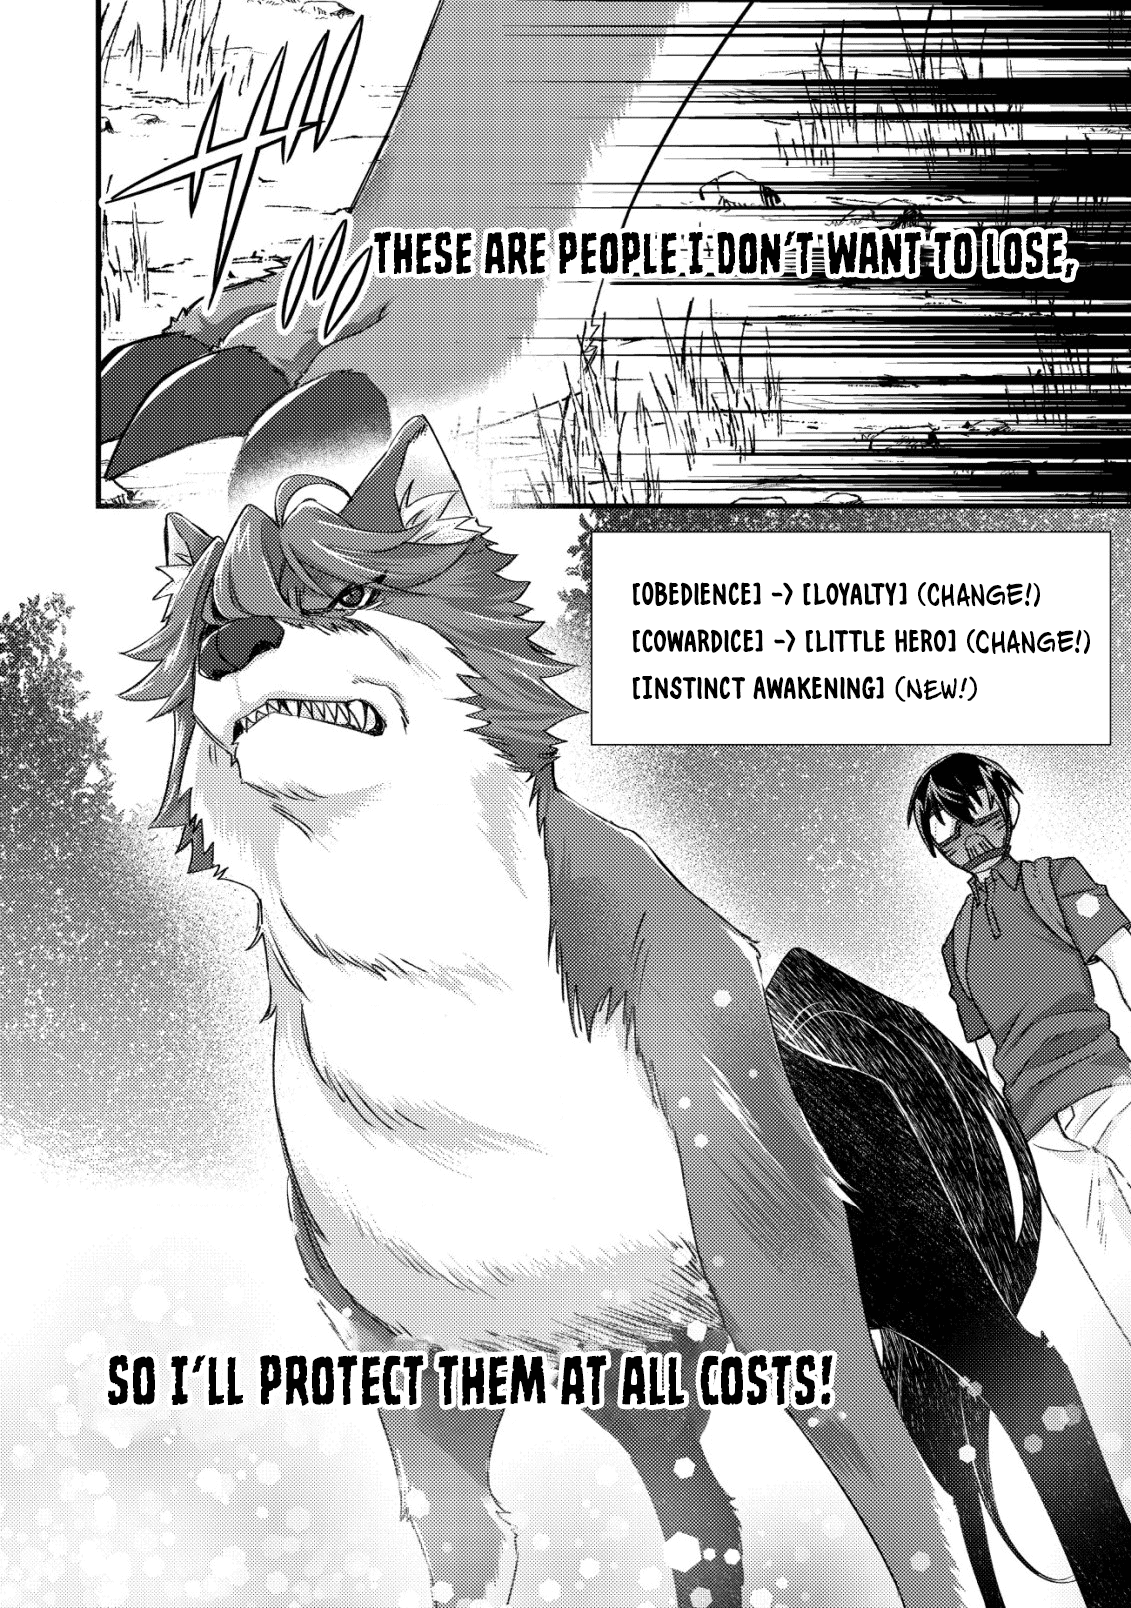 Can Even A Mob Highschooler Like Me Be A Normie If I Become An Adventurer? Vol.3 Chapter 12